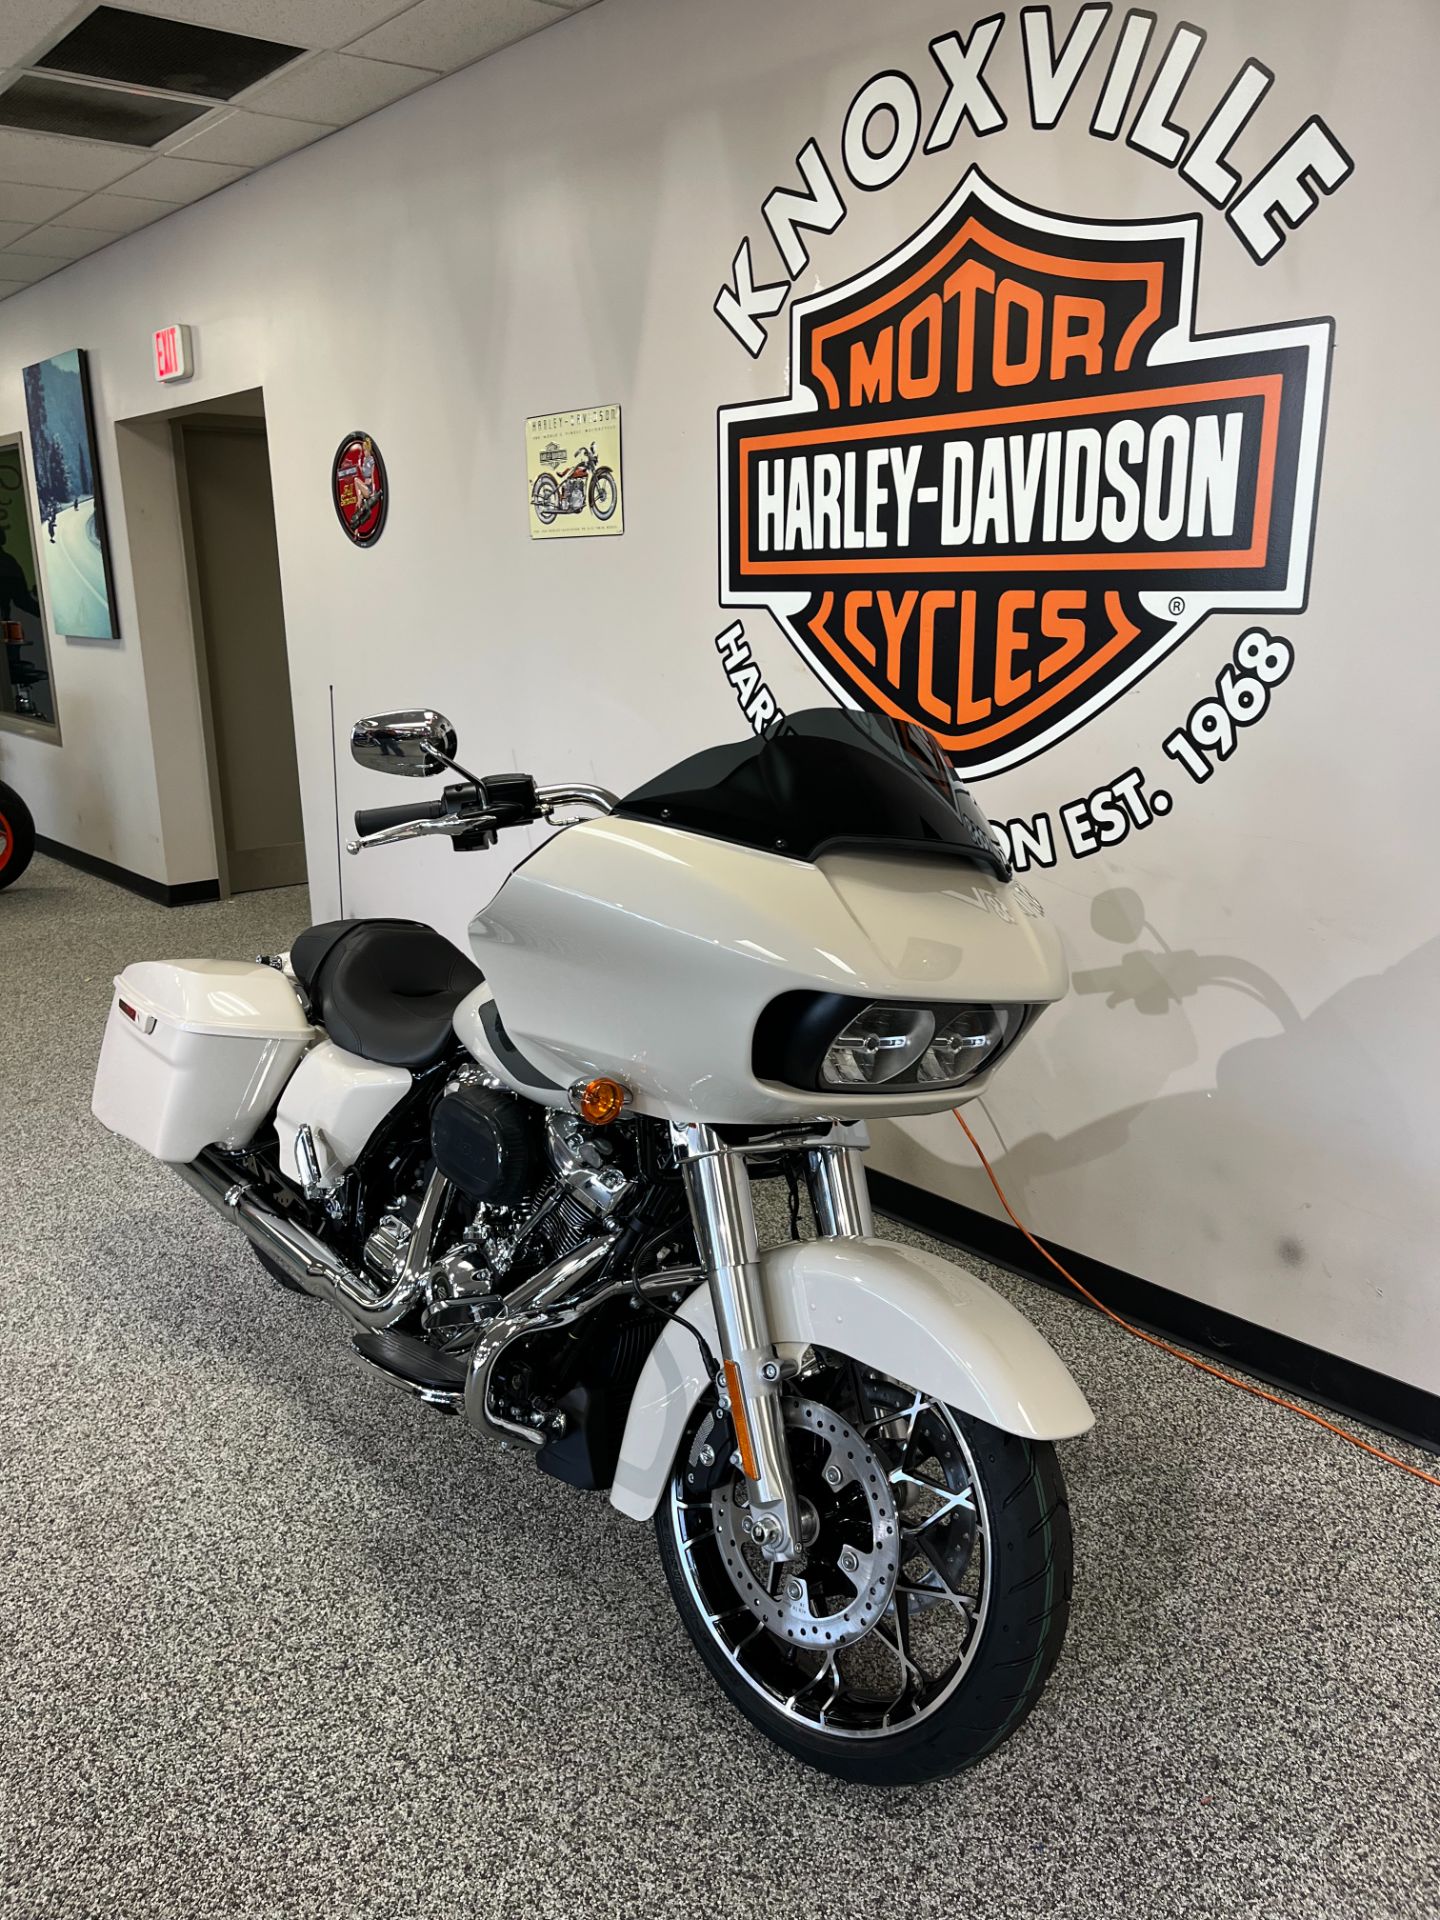 2022 Harley-Davidson ROAD GLIDE SPECIAL in Knoxville, Tennessee - Photo 3